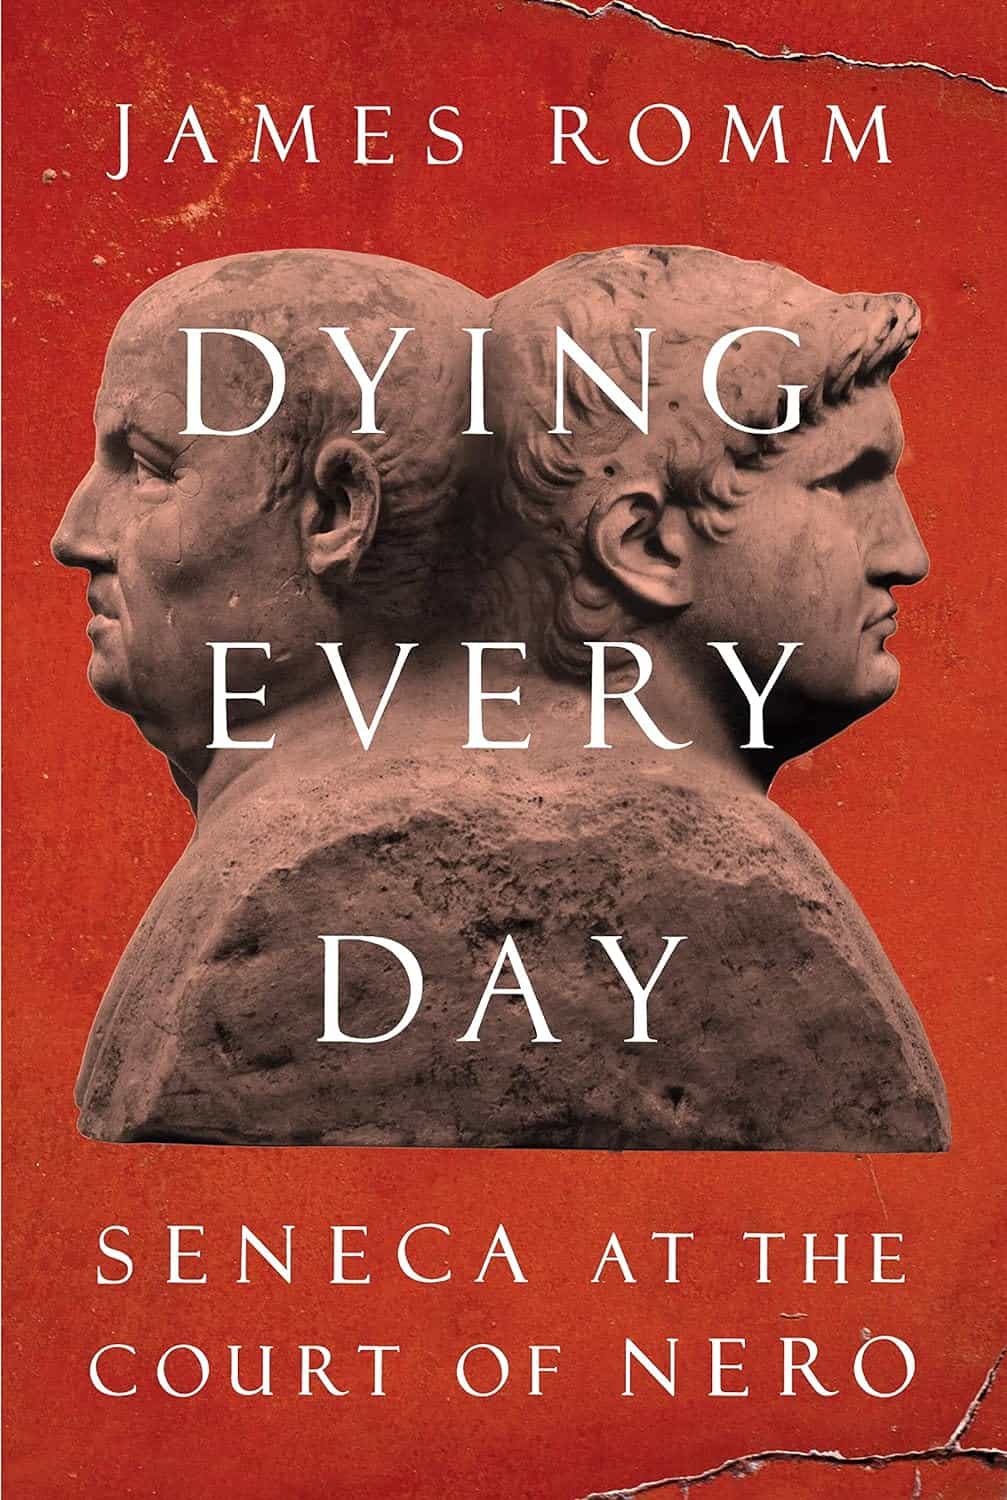 Dying Every Day by James Romm